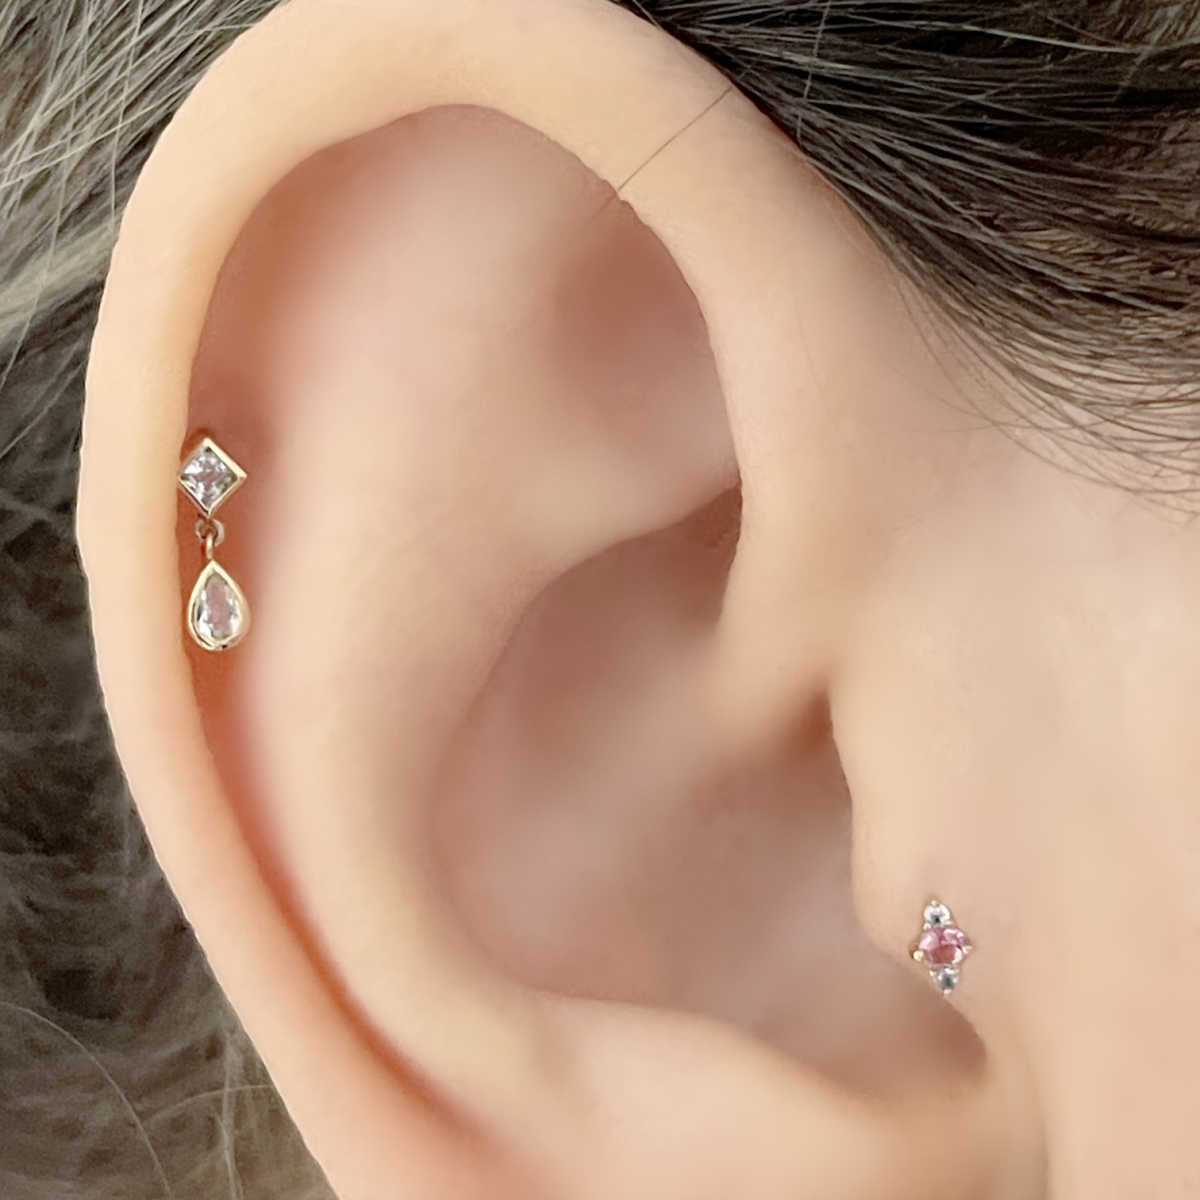 Buy Delicate Ear Piercing, 18k Gold Helix Earring, Cartilage Hoop, Daith  Jewelry, Tragus Ring, Unique Septum Ring, Lotus, Birthday Gift Idea Online  in India - Etsy